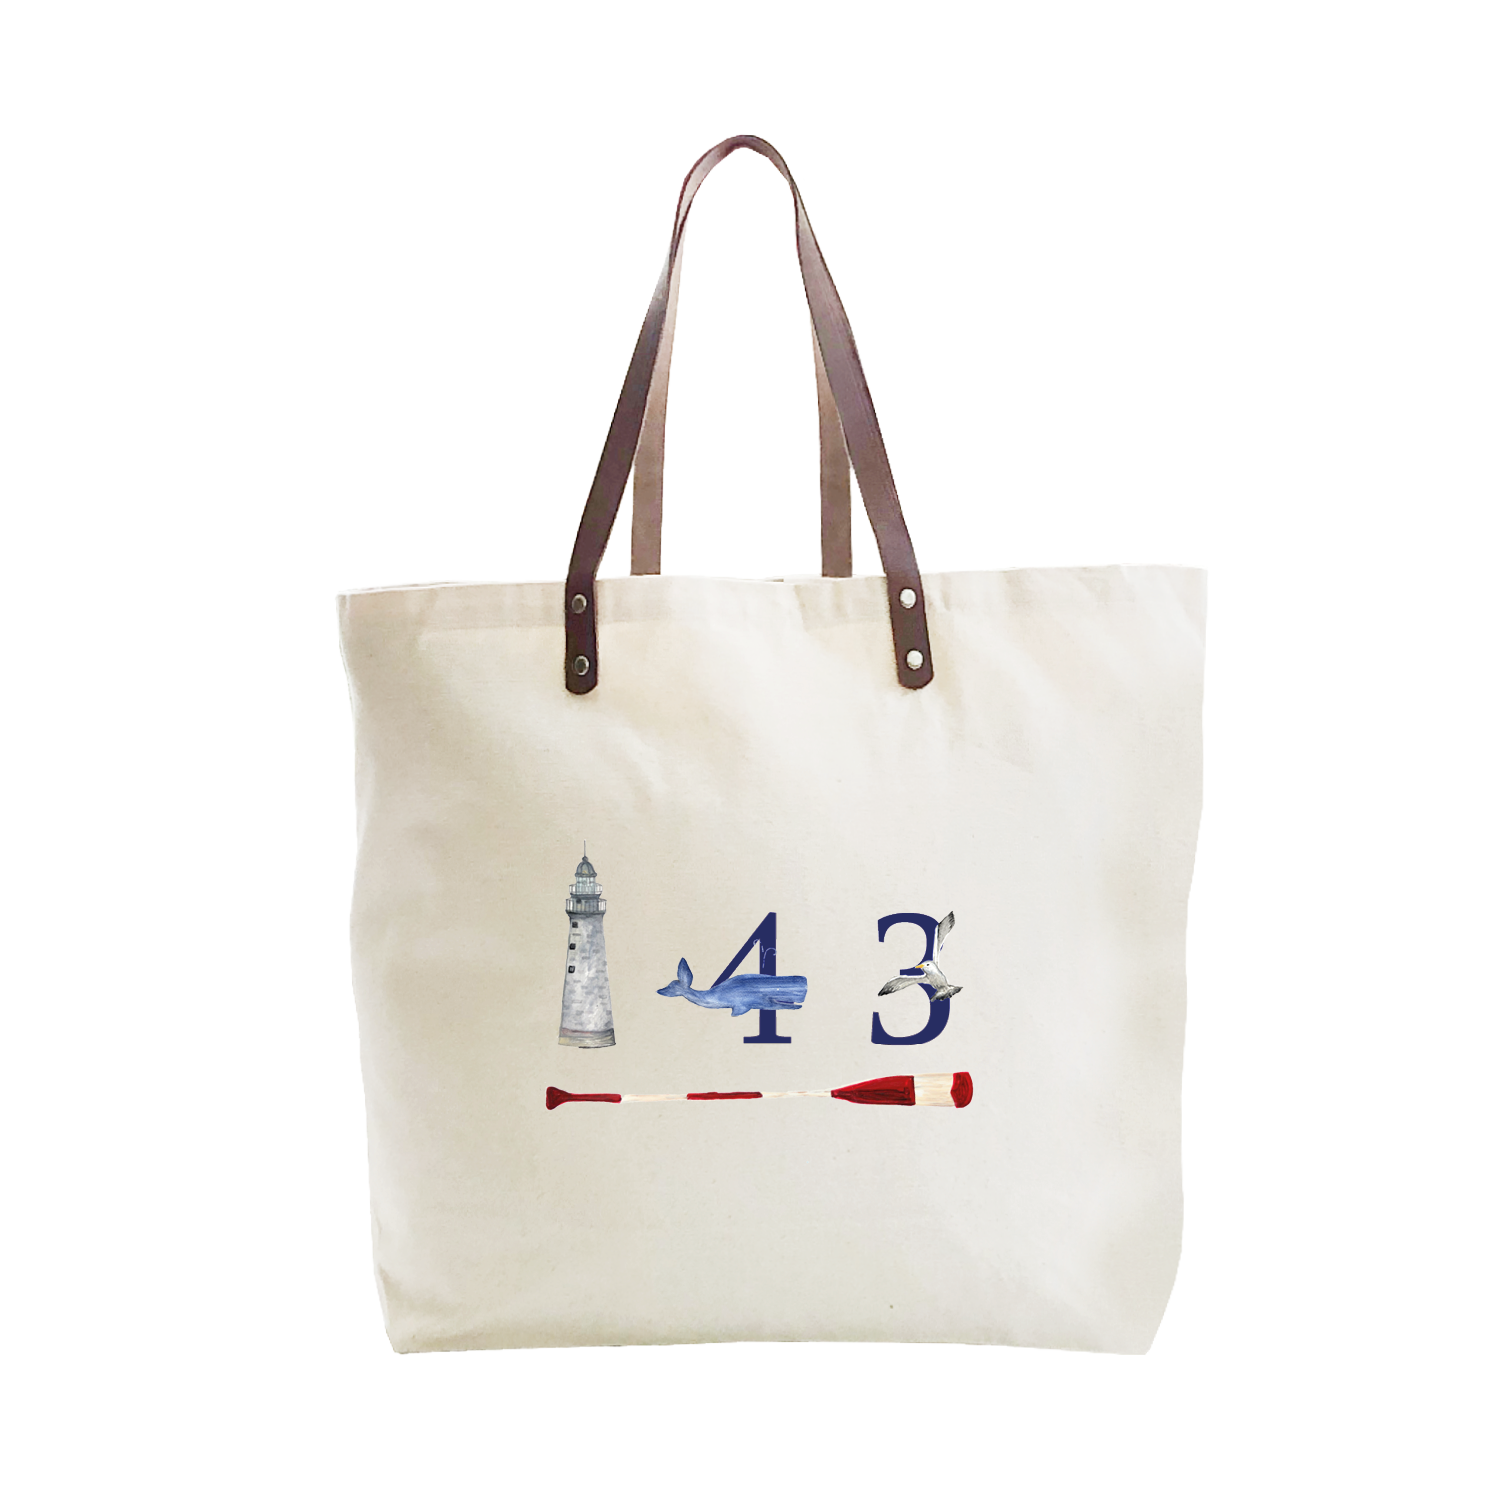 143 large tote